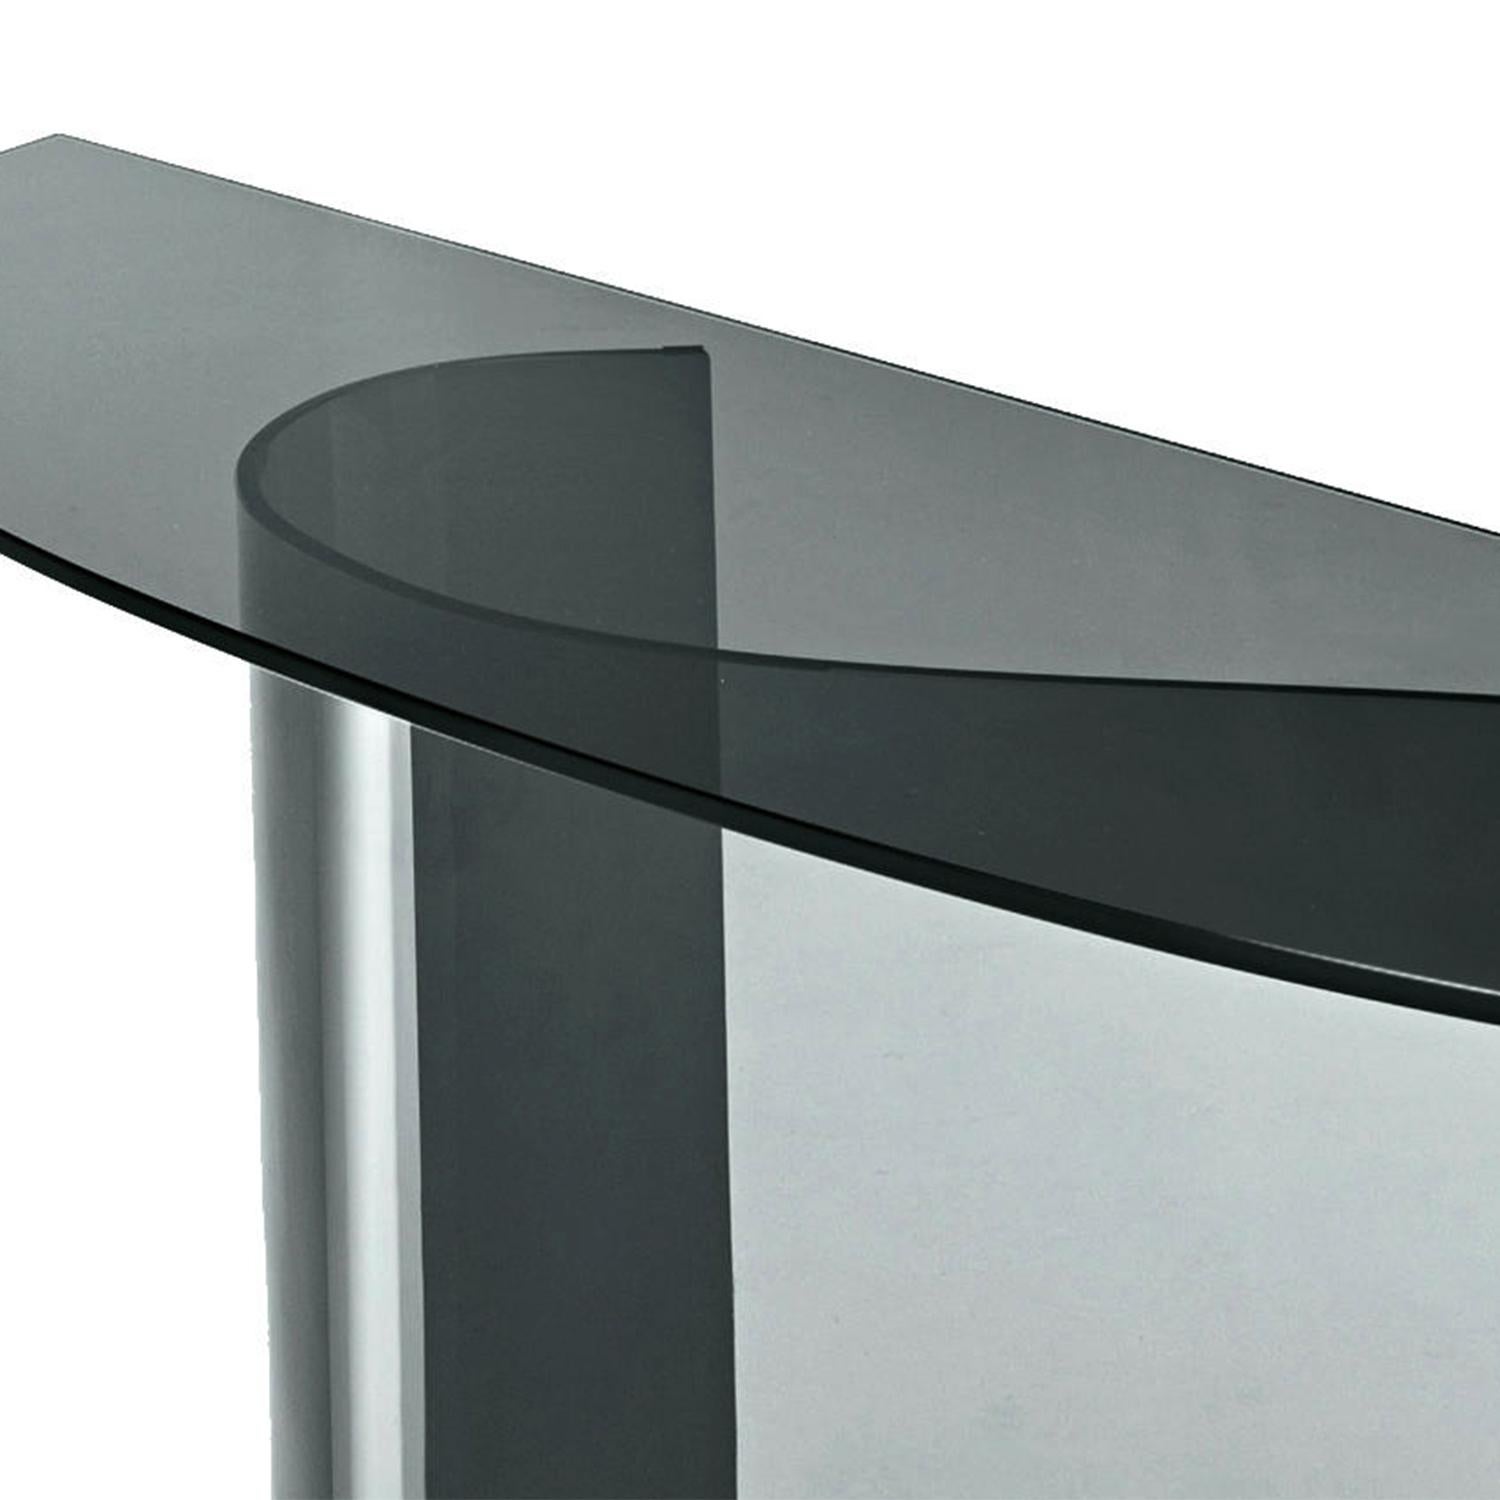 Console table curved baroco with tempered glass top, 
10 mm thickness, in smoke finish. With subtle curved glass 
base, 10 mm thickness. Also available in bronze glass finish
on request.